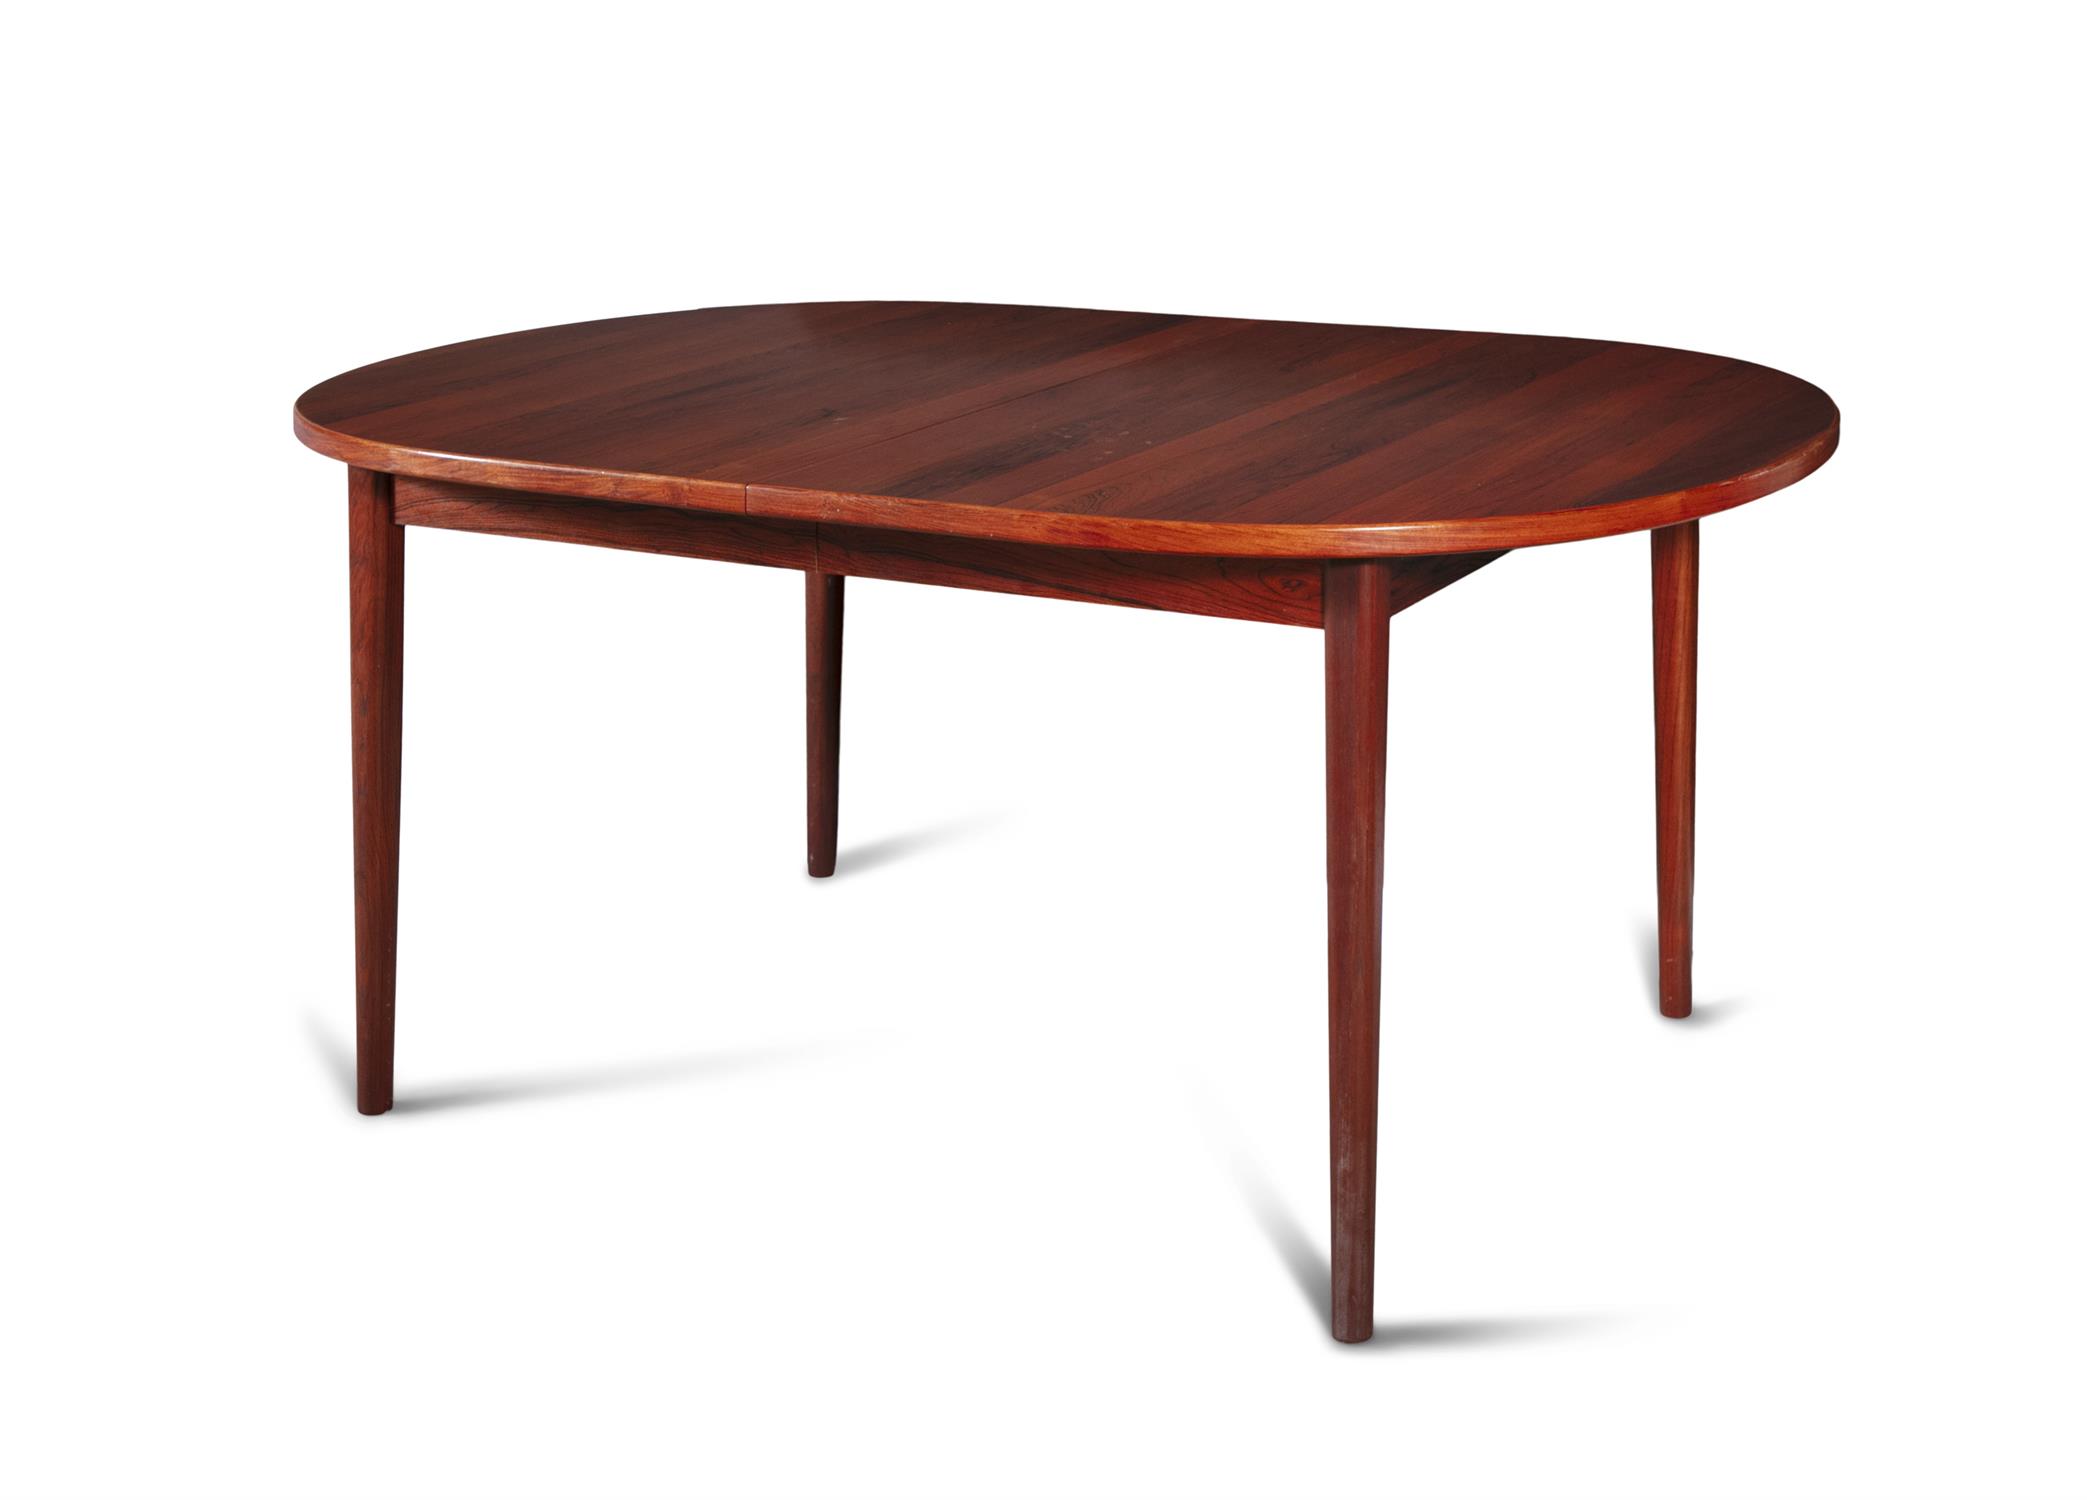 SAX A rosewood extending dining table, with 2 leaves. Denmark, c.1960. 101 x 155/210/265 x 75cm(h) - Image 2 of 5